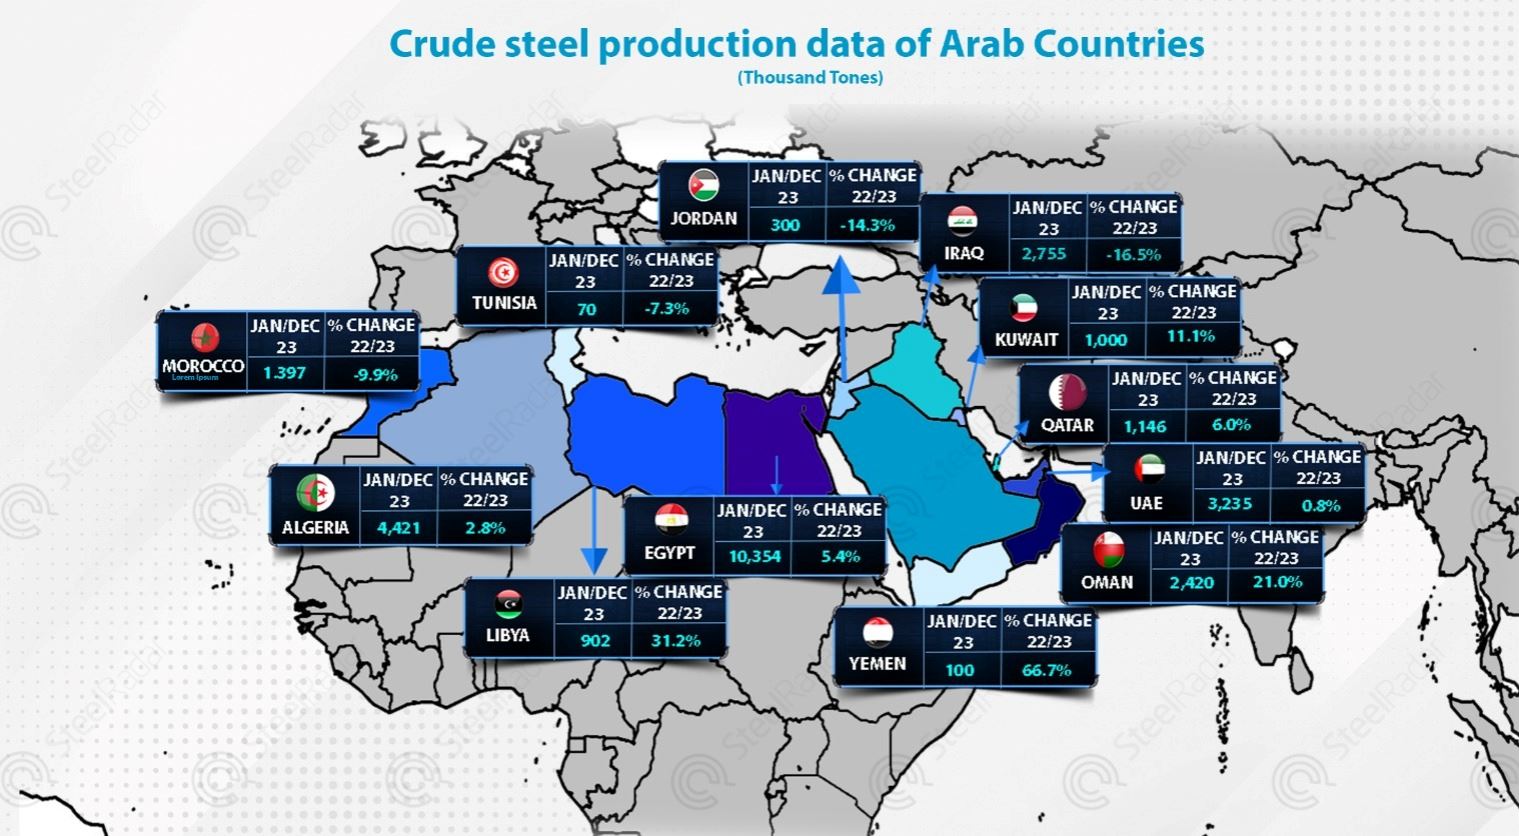 What are the factors behind the increase in crude steel production in the Middle East?